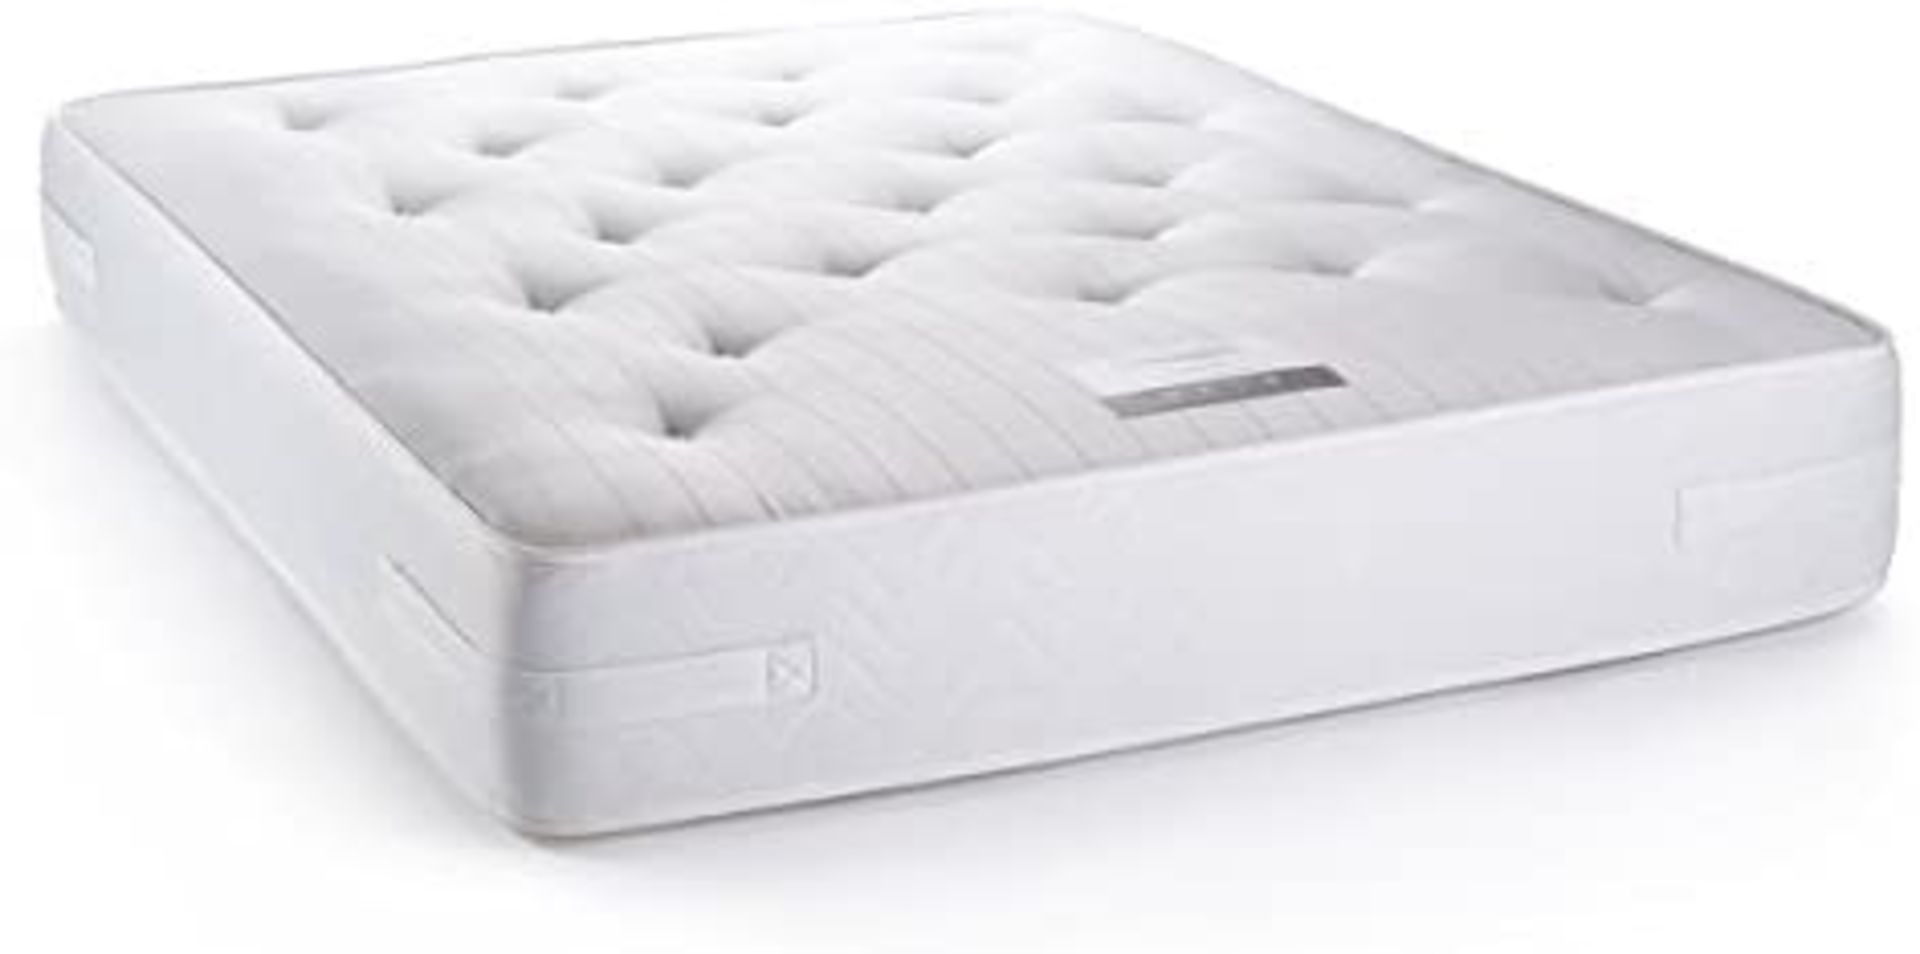 + VAT Brand New Fairford Memory 1000 King Size Mattress - Designed With Excellent Orthopaedic